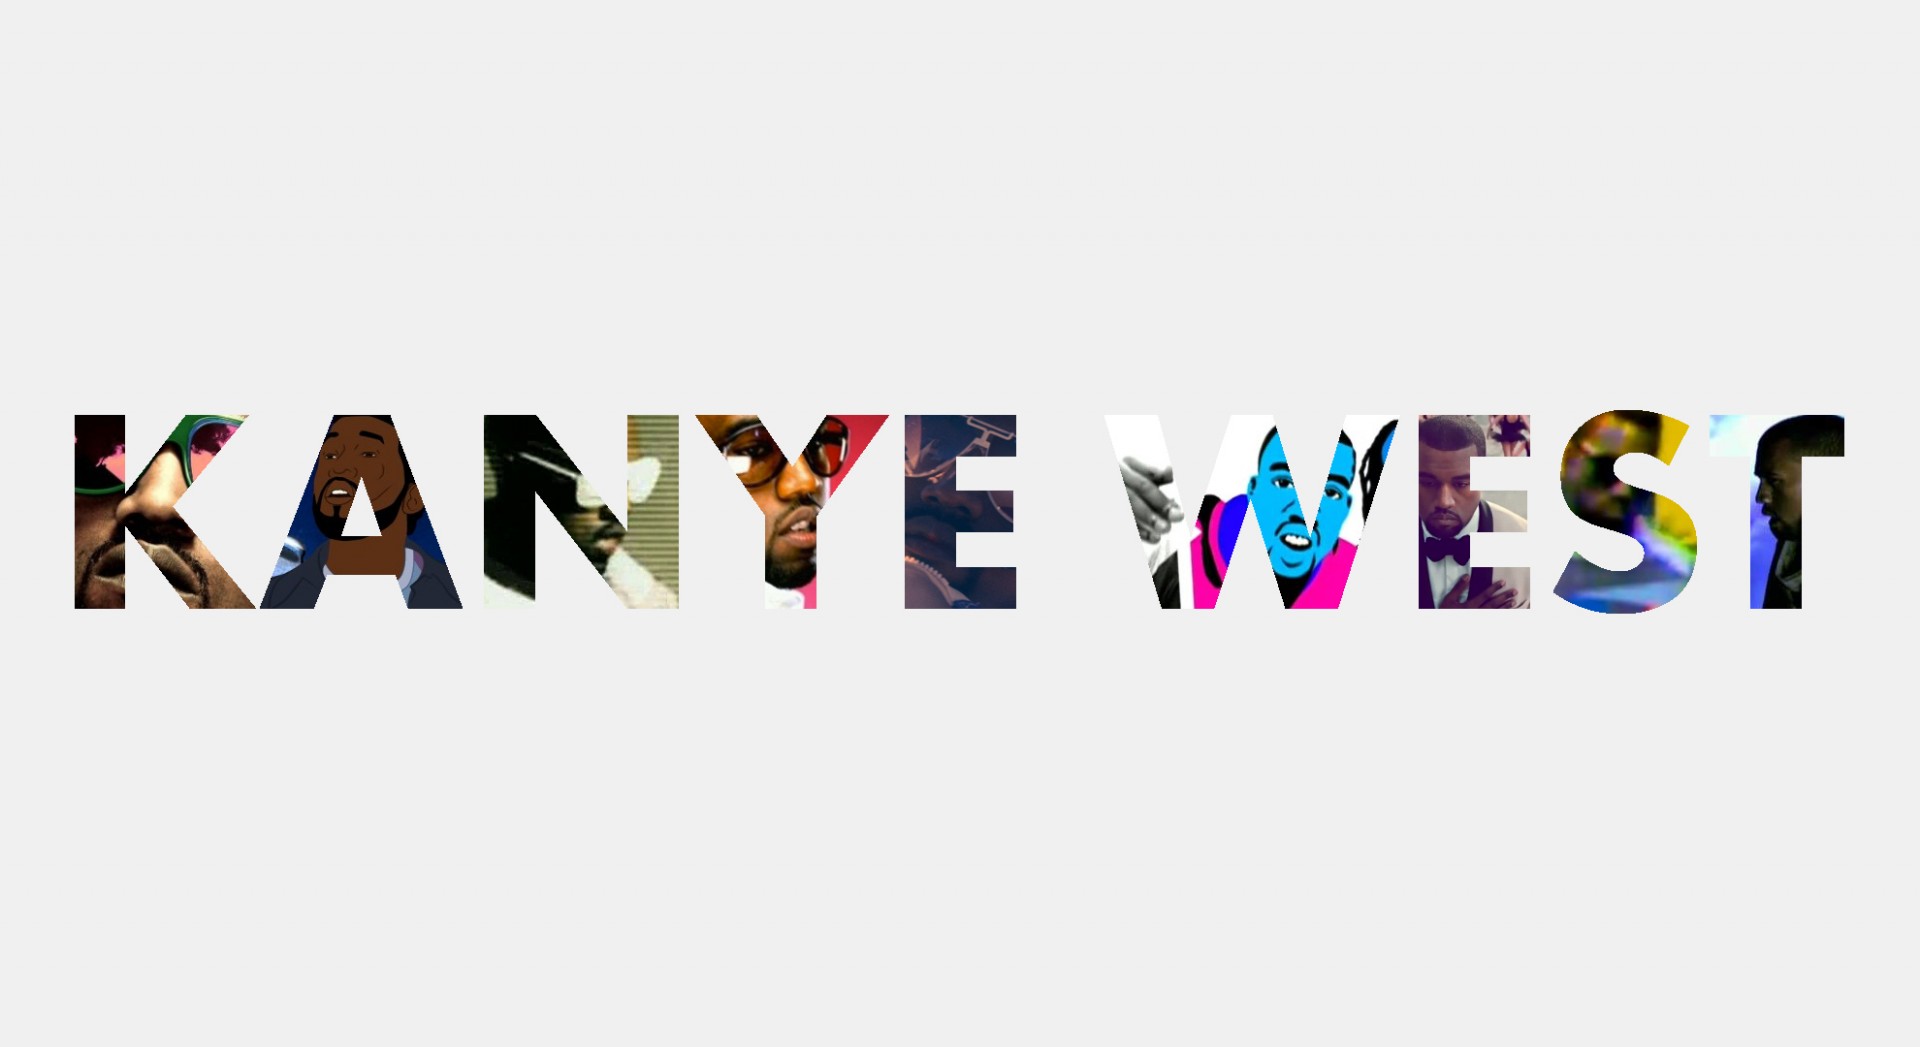 Download Kanye West Name background for your phone iPhone android